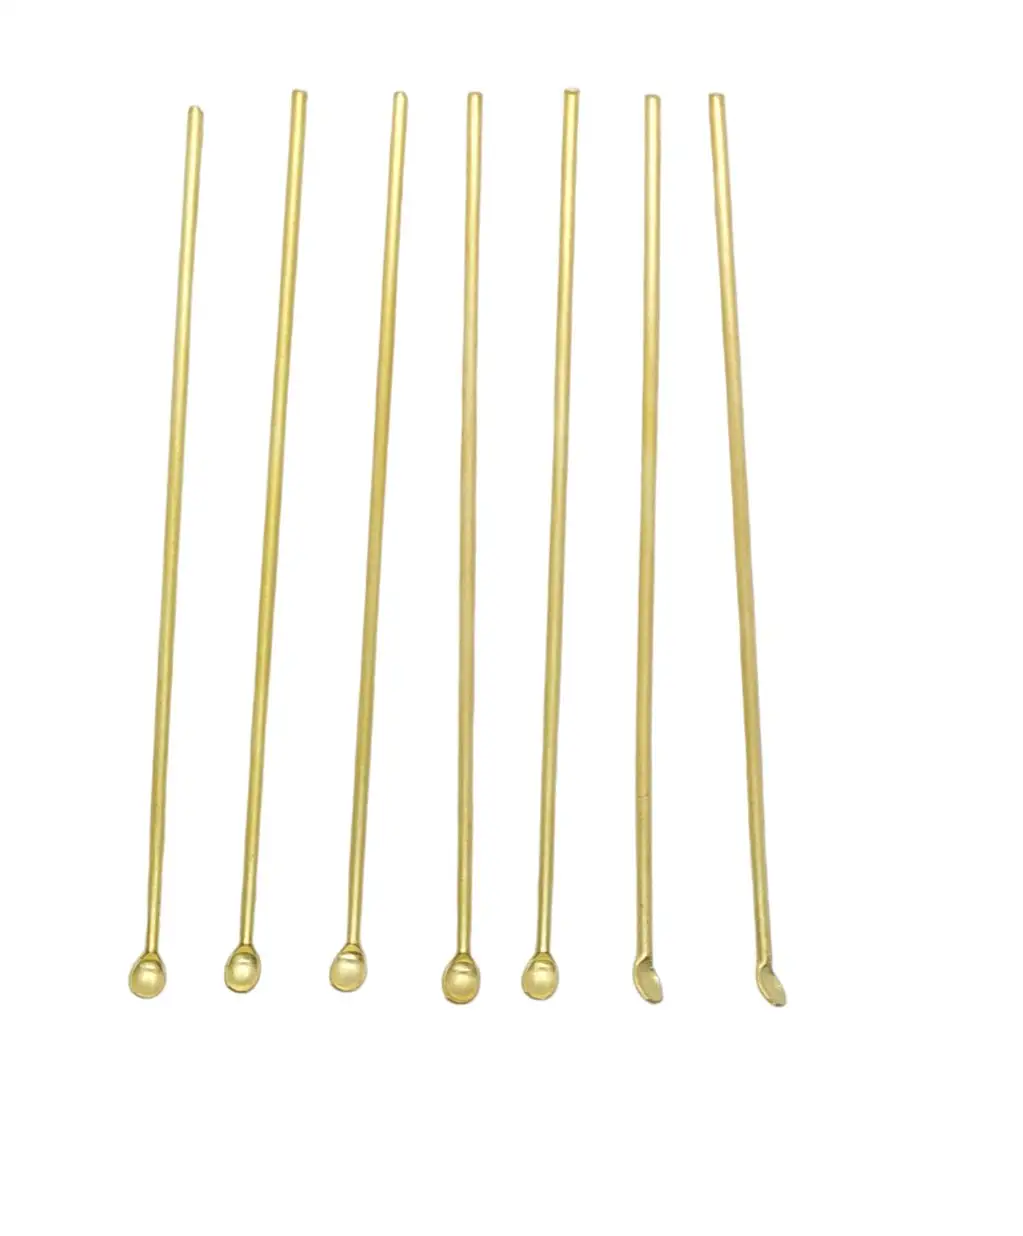 Ear Cleaning Special Gold Pattern Set 12 pcs Ear Cleaner Kits Brass Earpick Earwax Remover Spoon Spiral Ear Cleaning Tool